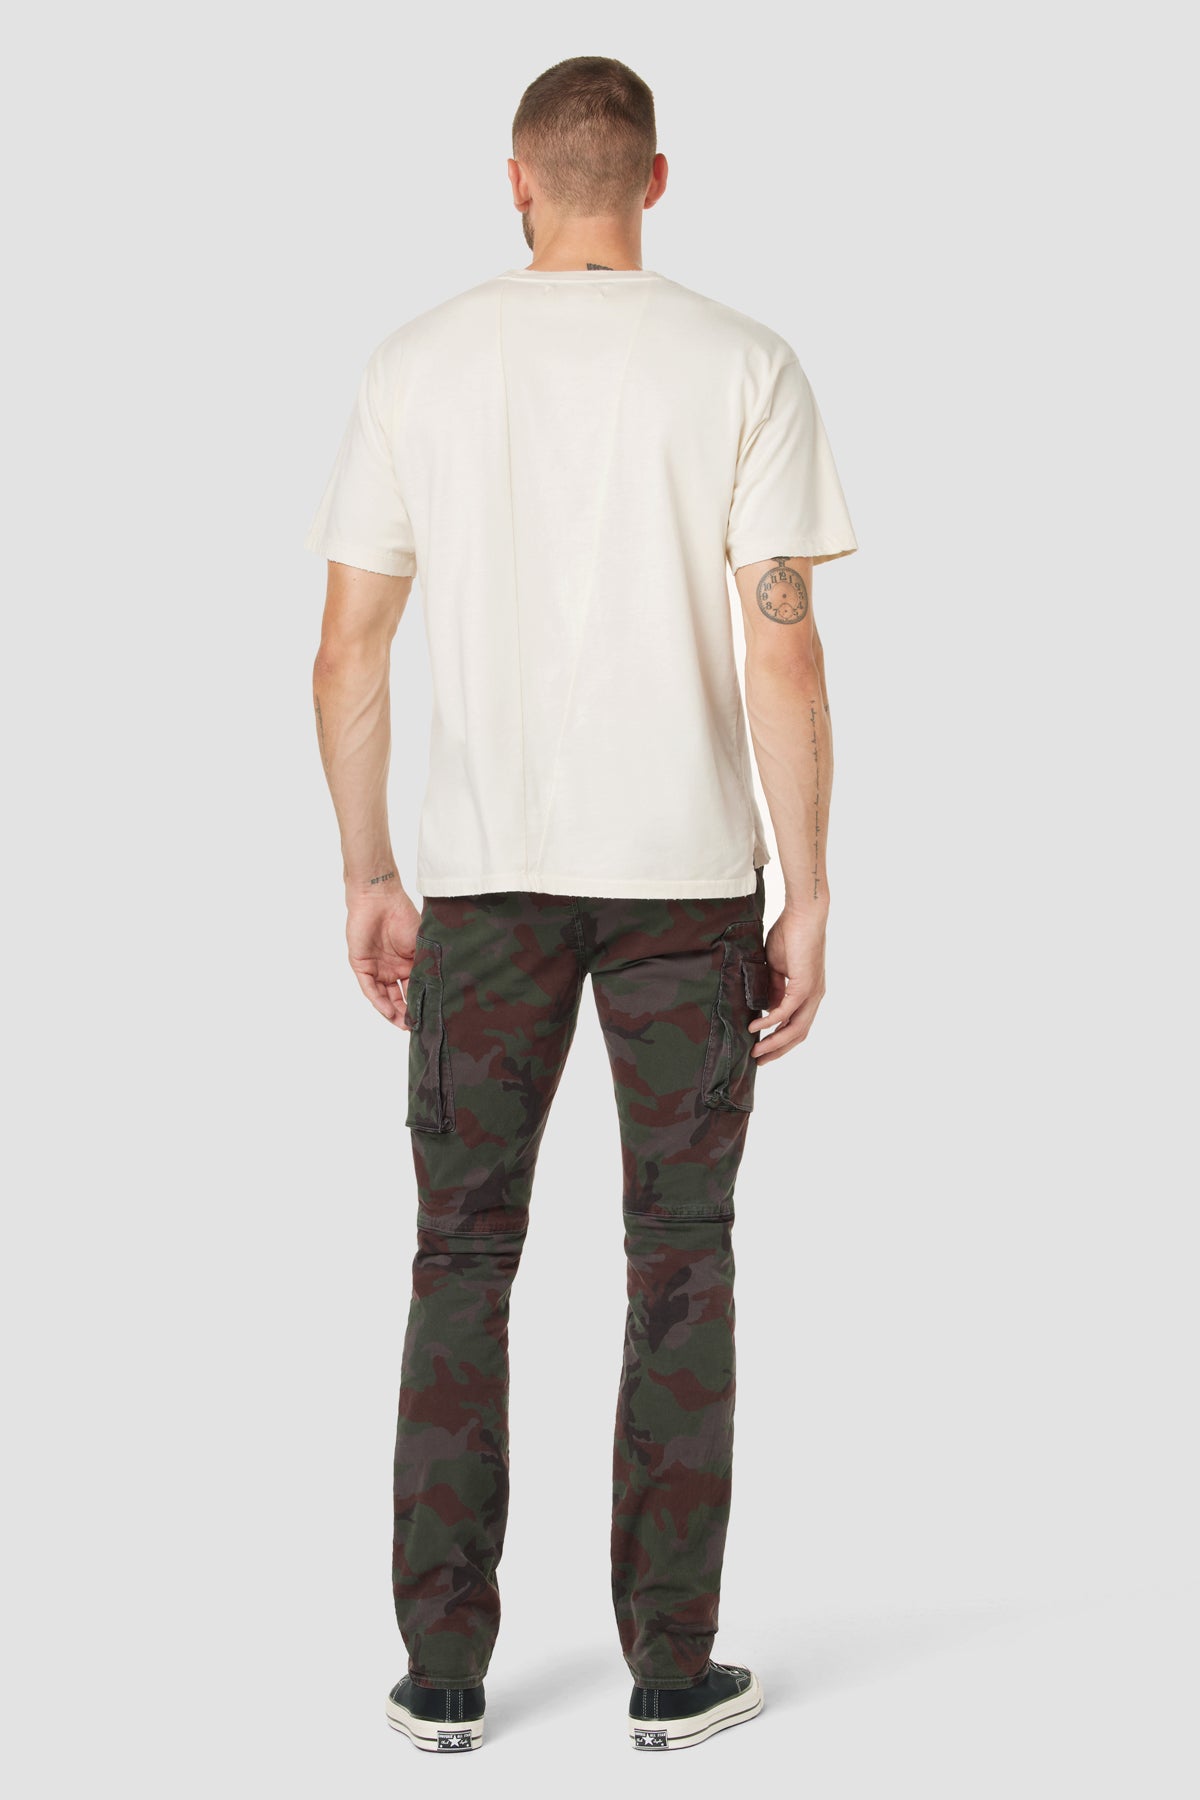 Shop Stacked Slim Military Cargo Pant Hudson Jeans to a new level